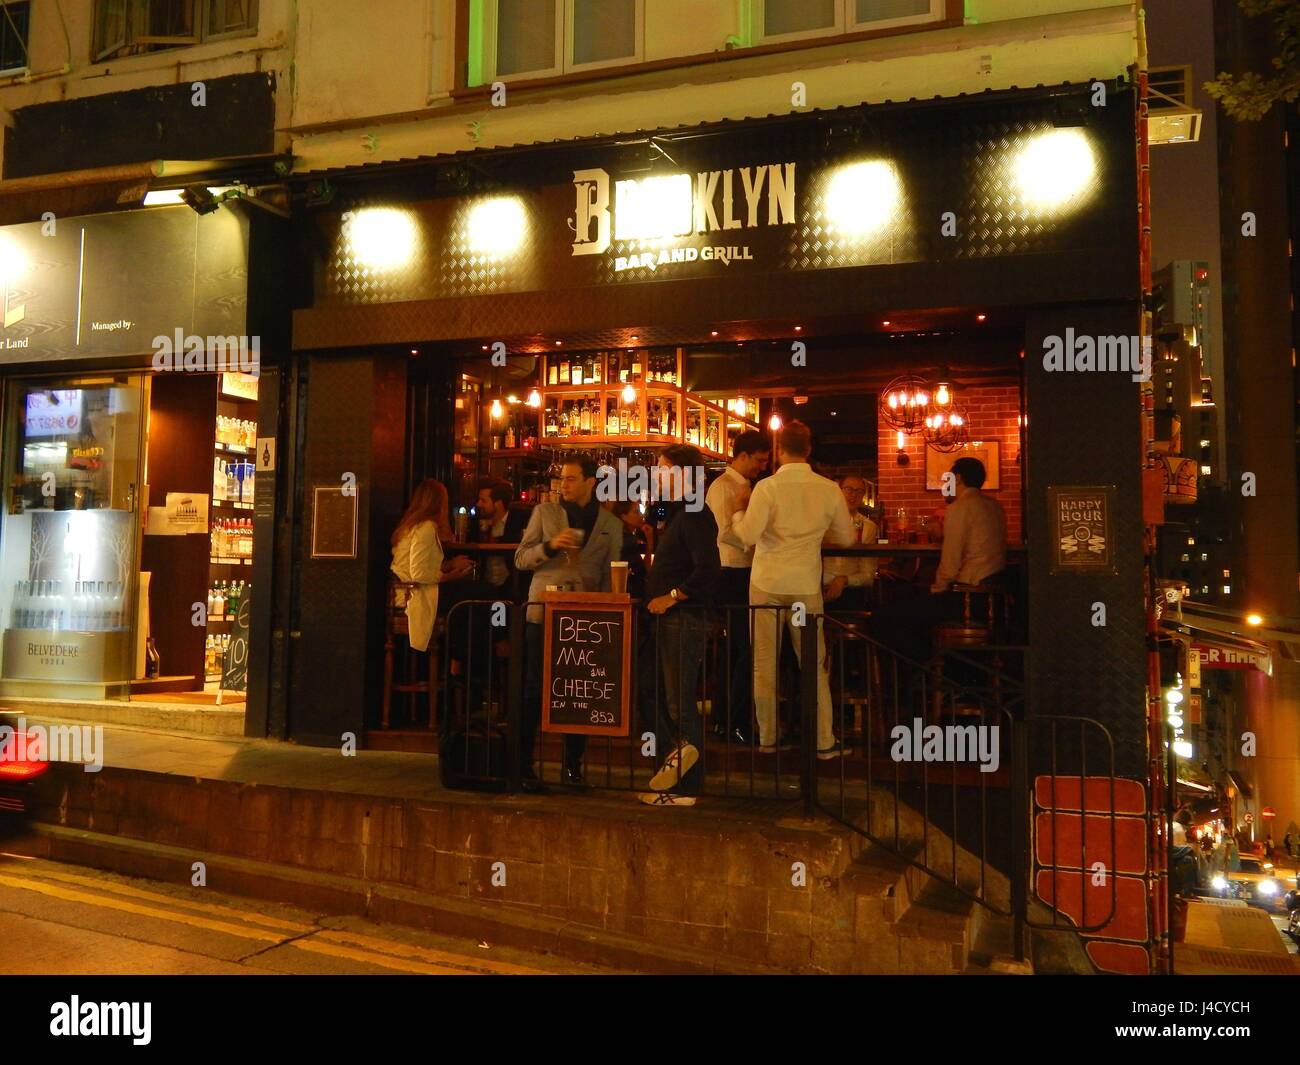 Brooklyn Bar & Grill brings the New York vibe to Hong Kong - Casual Staunton Street gastropub specialises in traditional US comfort food such as fried chicken and cheesecake served in American-sized portions in SoHo - Hong Kong Island | usage worldwide Stock Photo